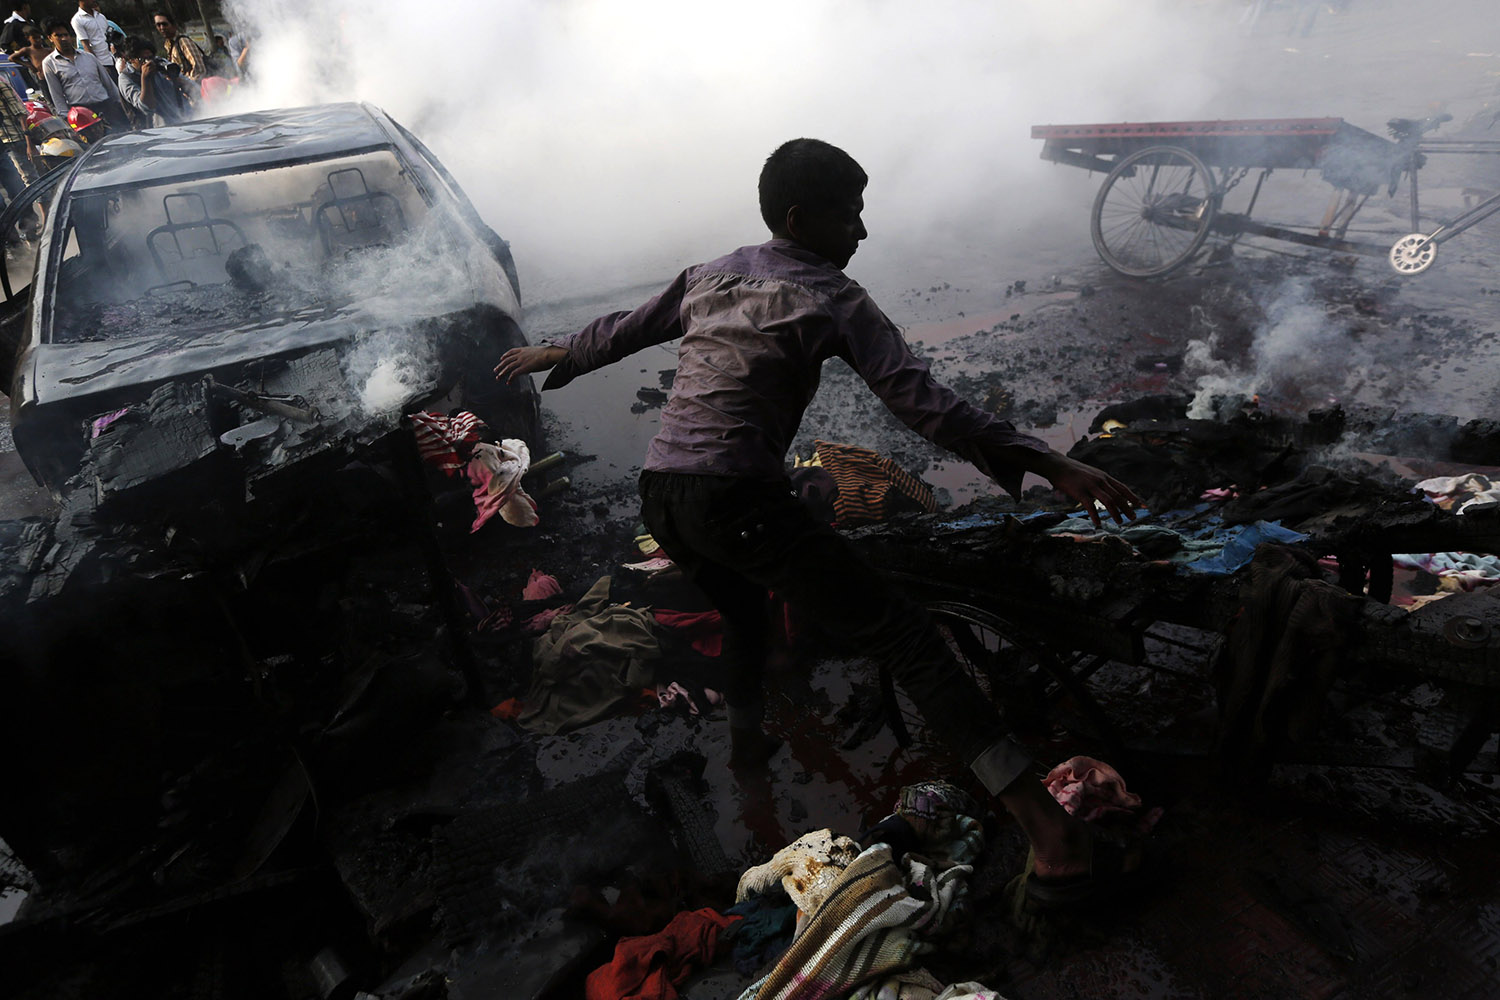 A boy tries to control a fire after vehicles were torched and vandalized by Bangladesh's Jamaat-e-Islami party activists during clashes with police in Dhaka